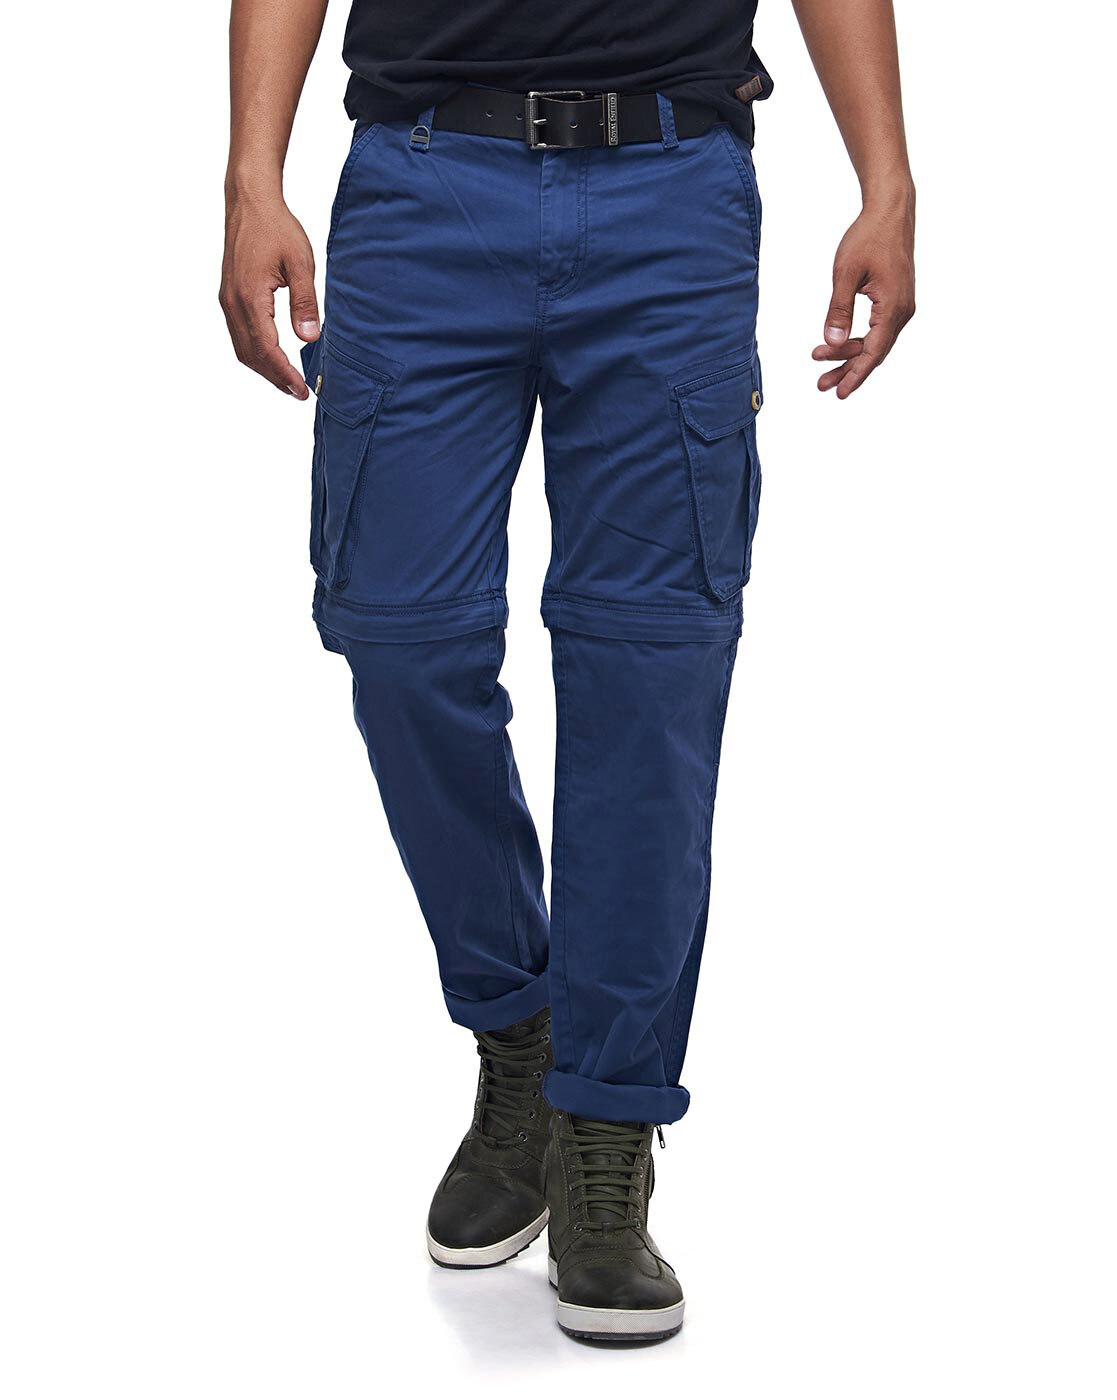 Royal Enfield Ceara Black Riding Trouser  Buy online in India